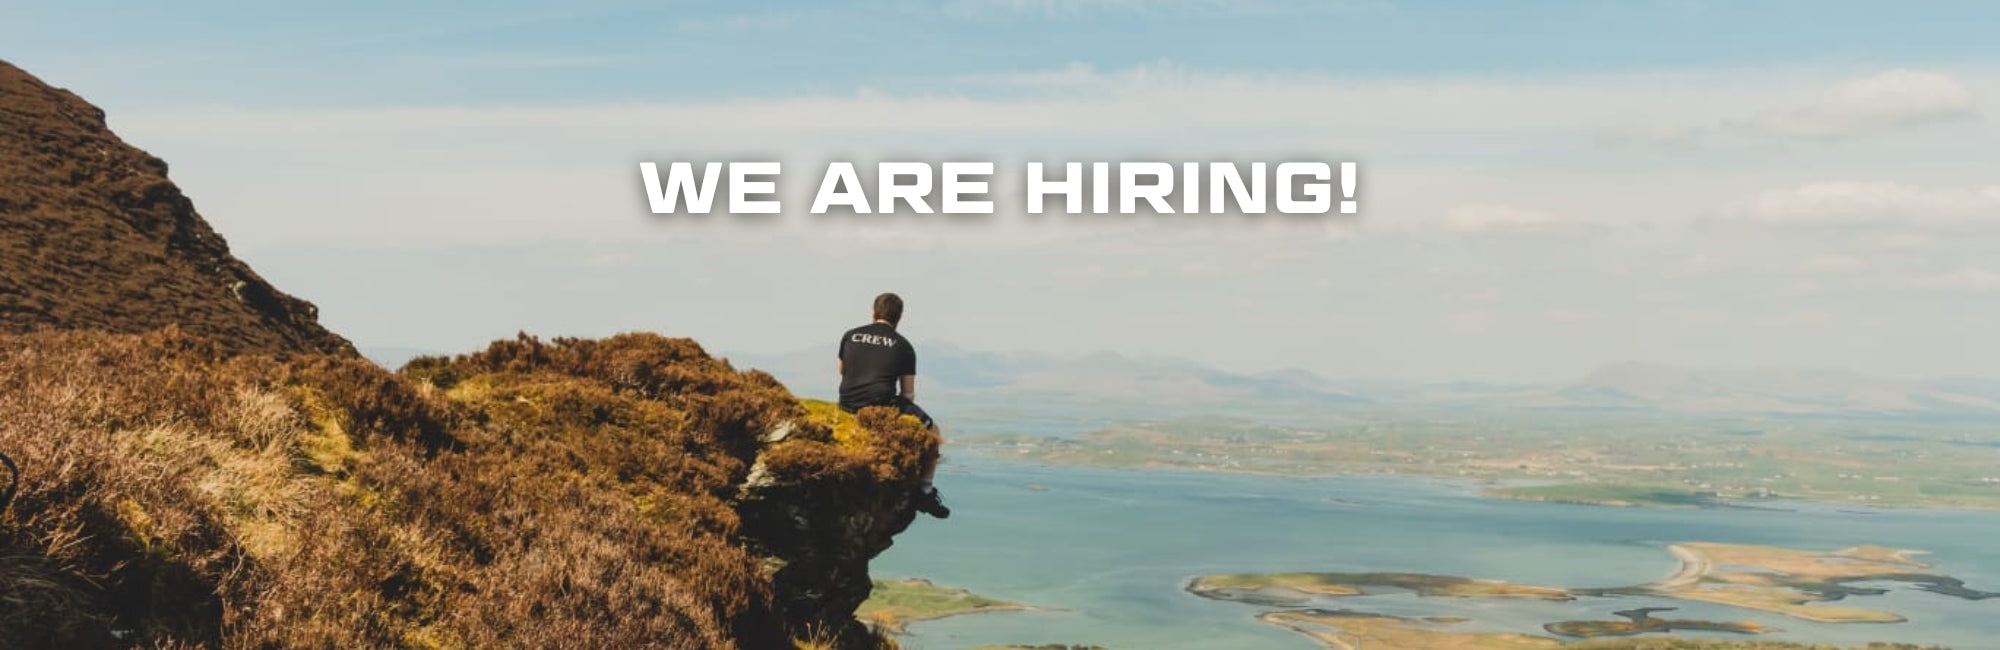 Join The Portwest Team - We are Hiring